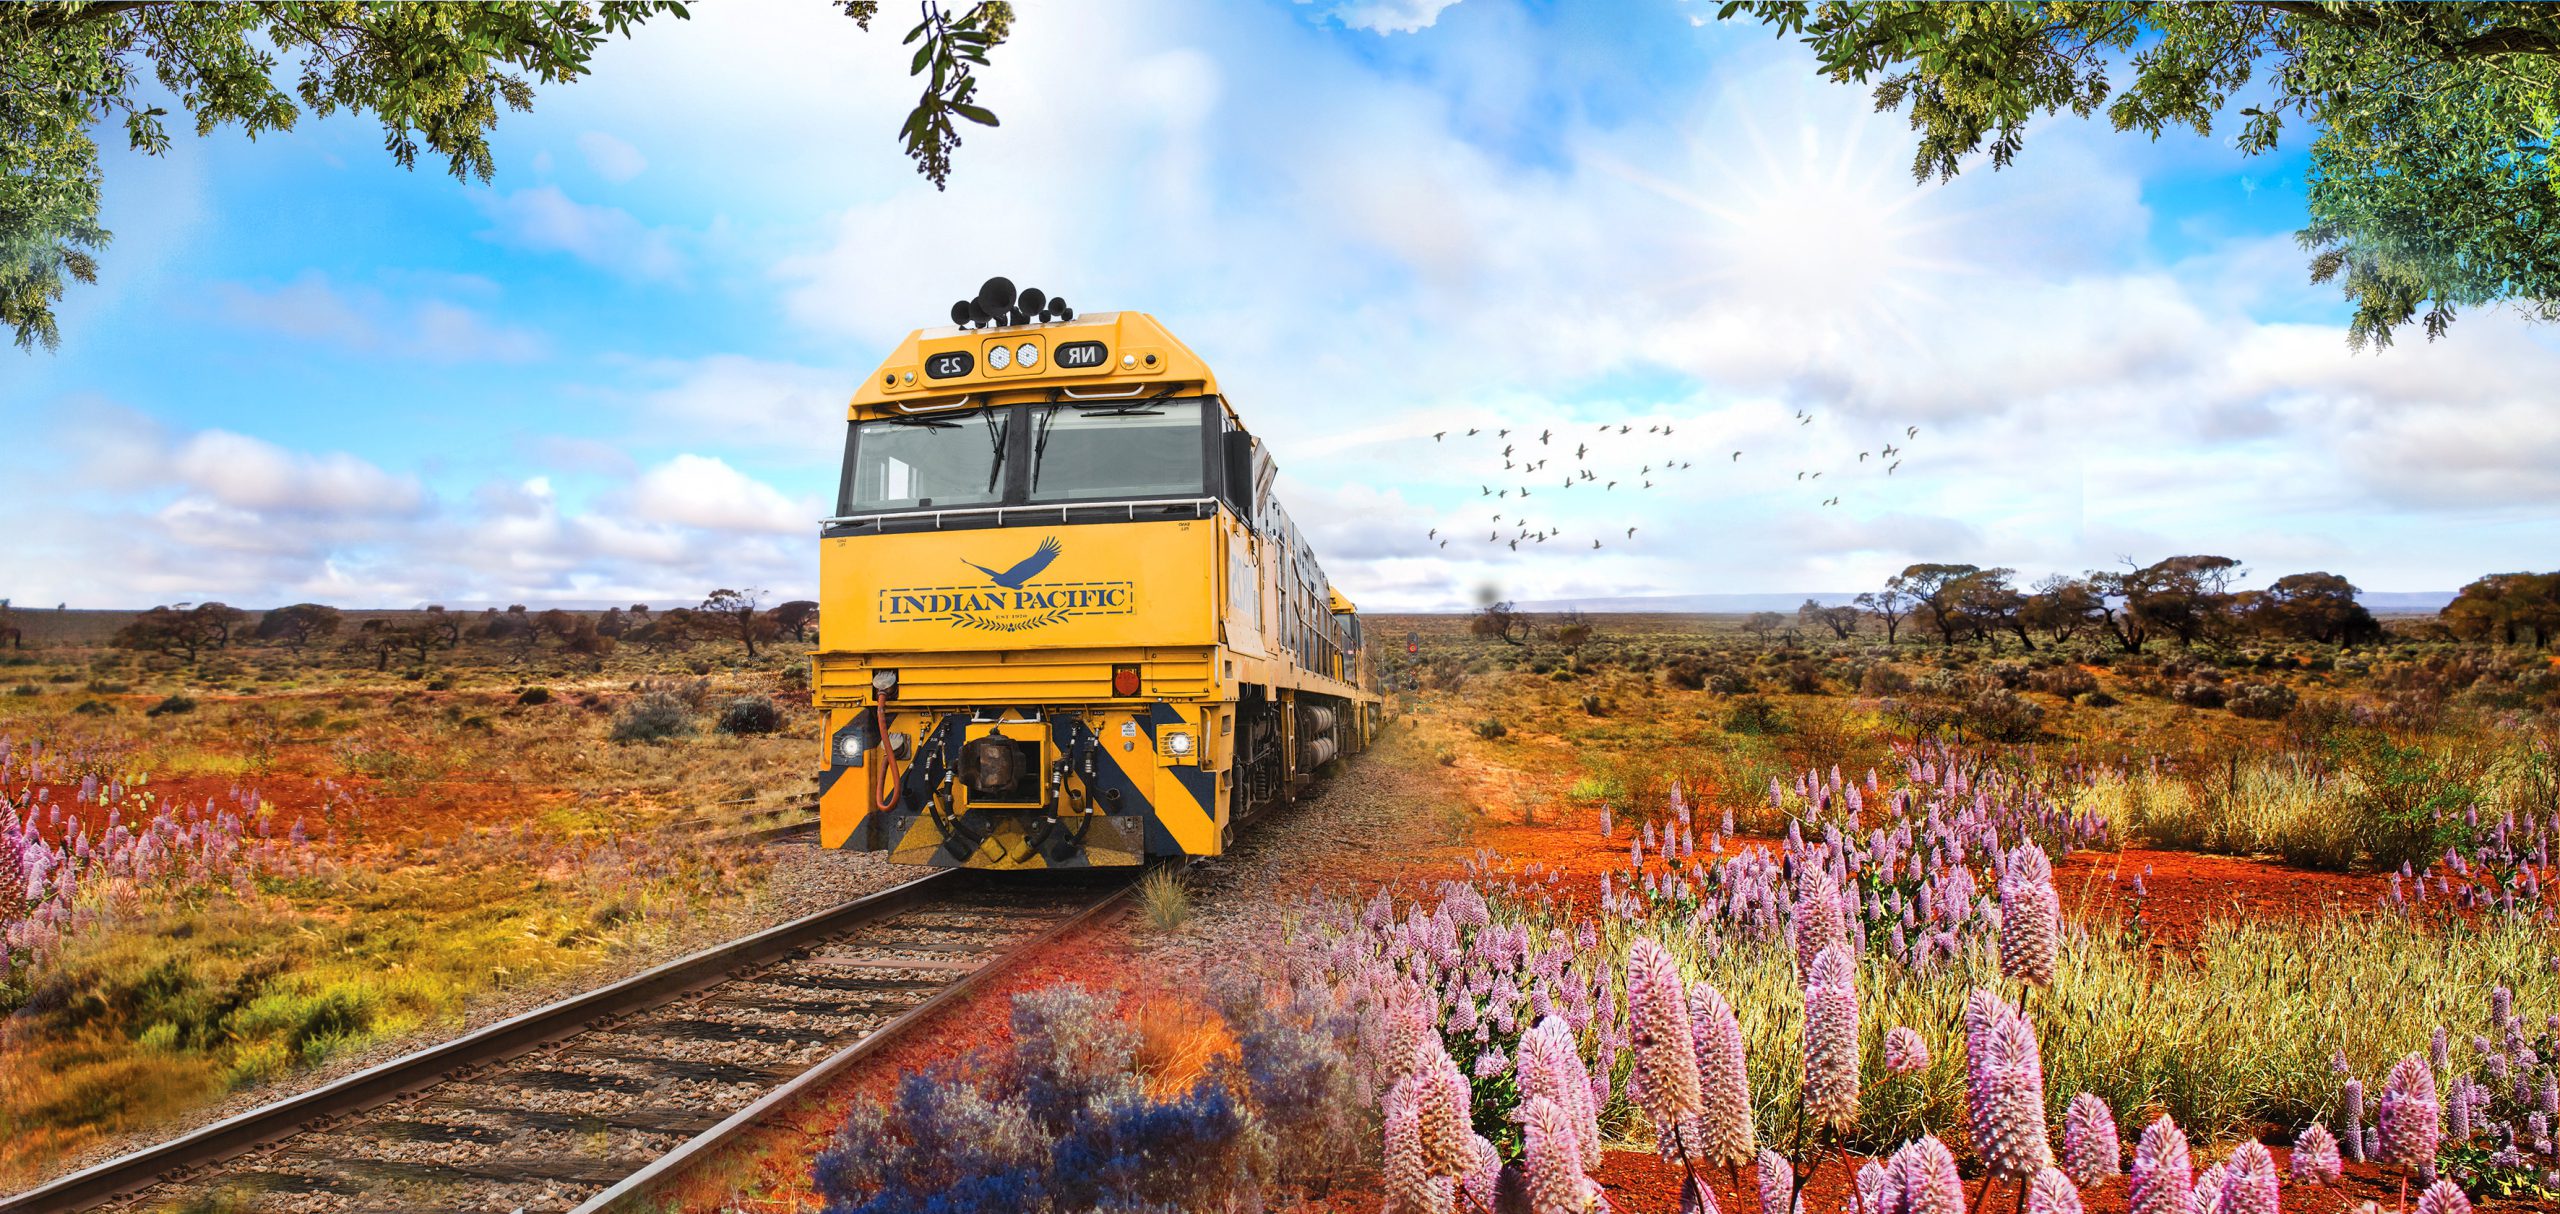 Go on a 22-night cruise and Indian Pacific train journey holiday from $409pp per night